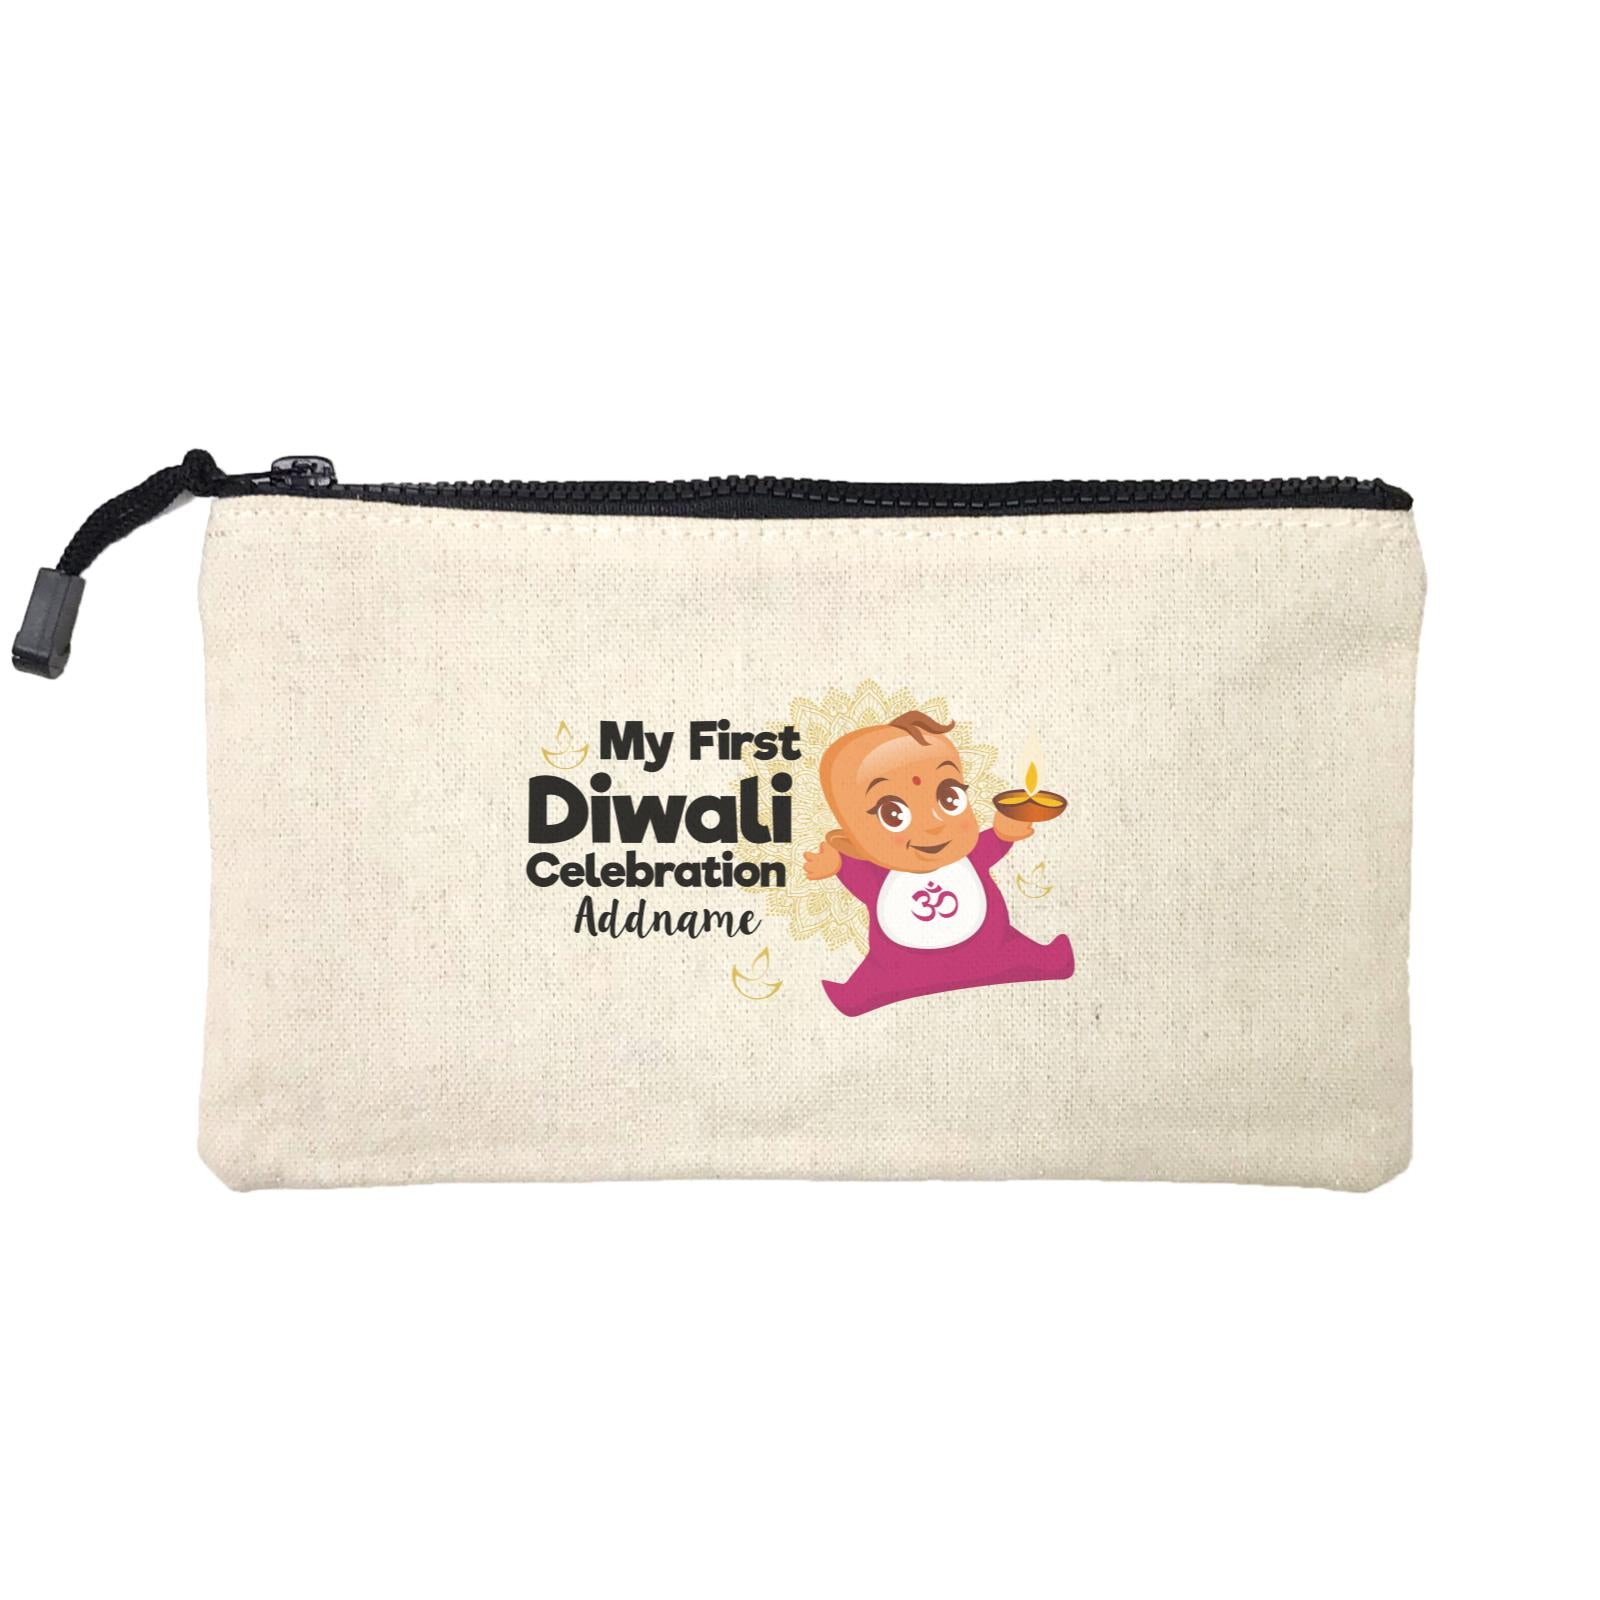 Cute Baby My First Diwali Celebration Addname Mini Accessories Stationery Pouch